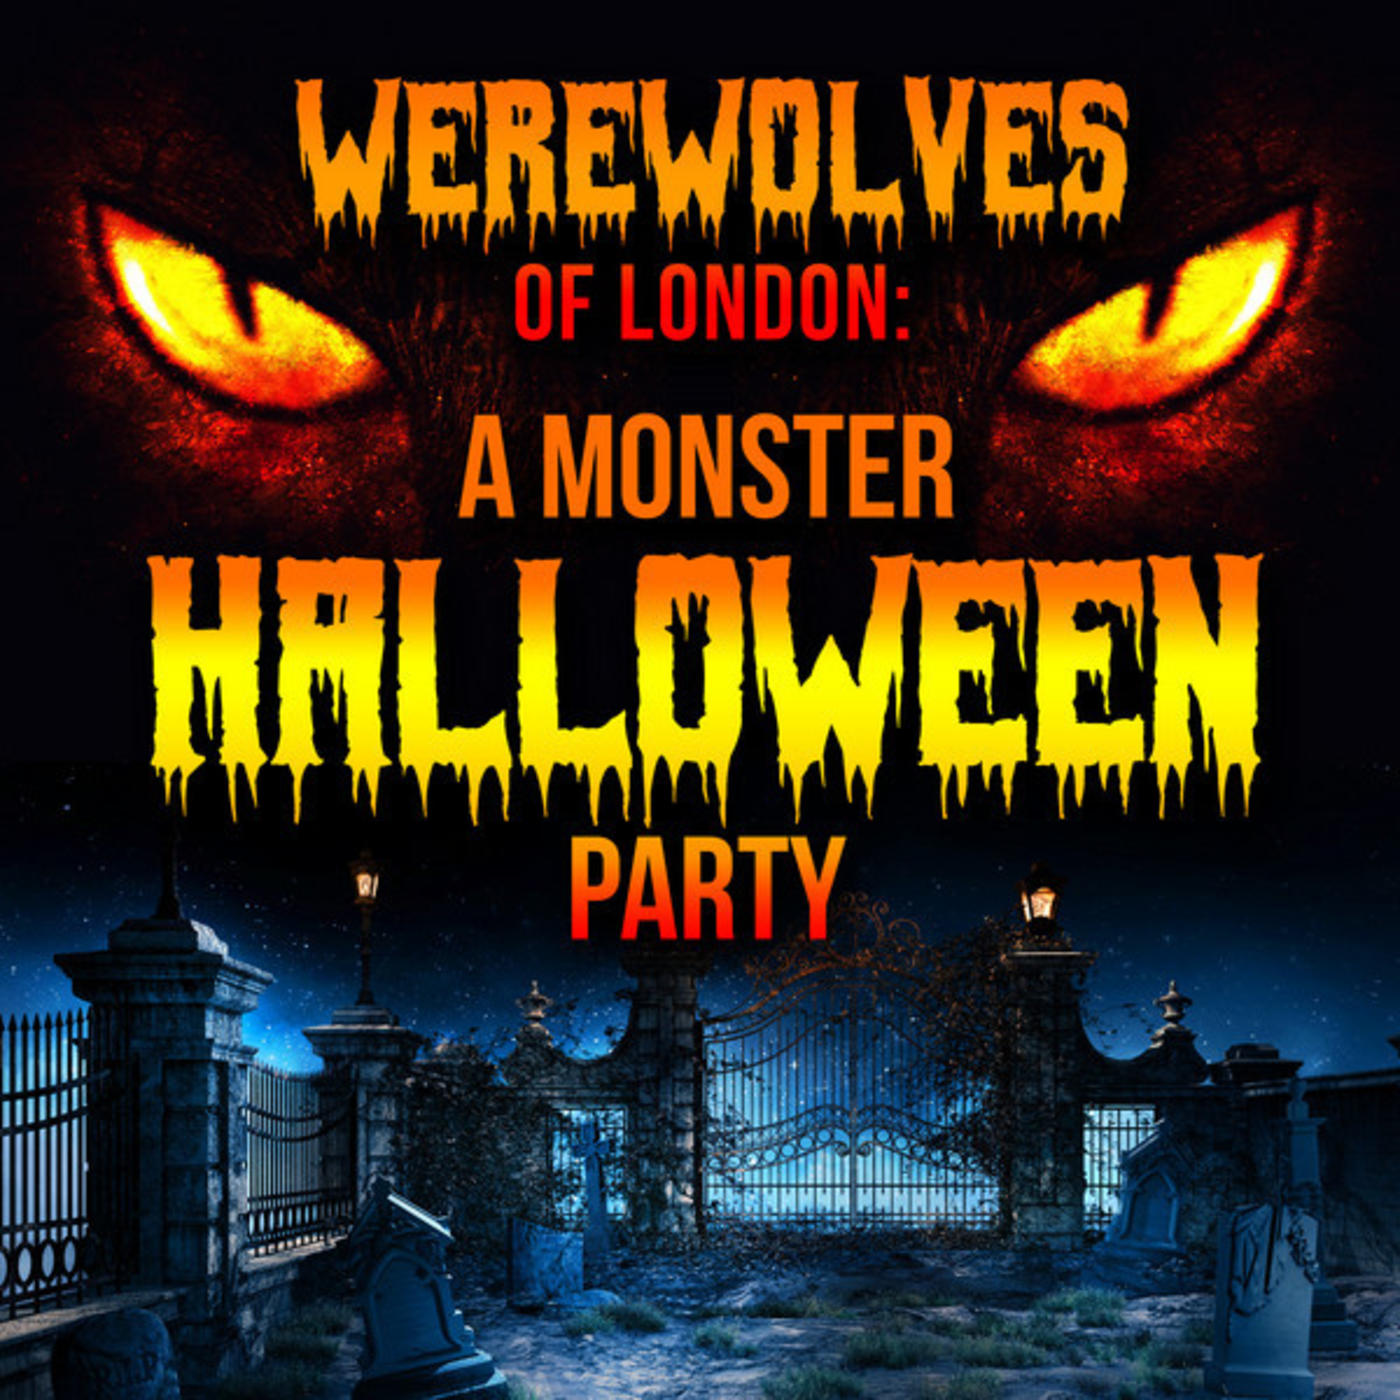 Werewolves of London: A Monster Halloween Party